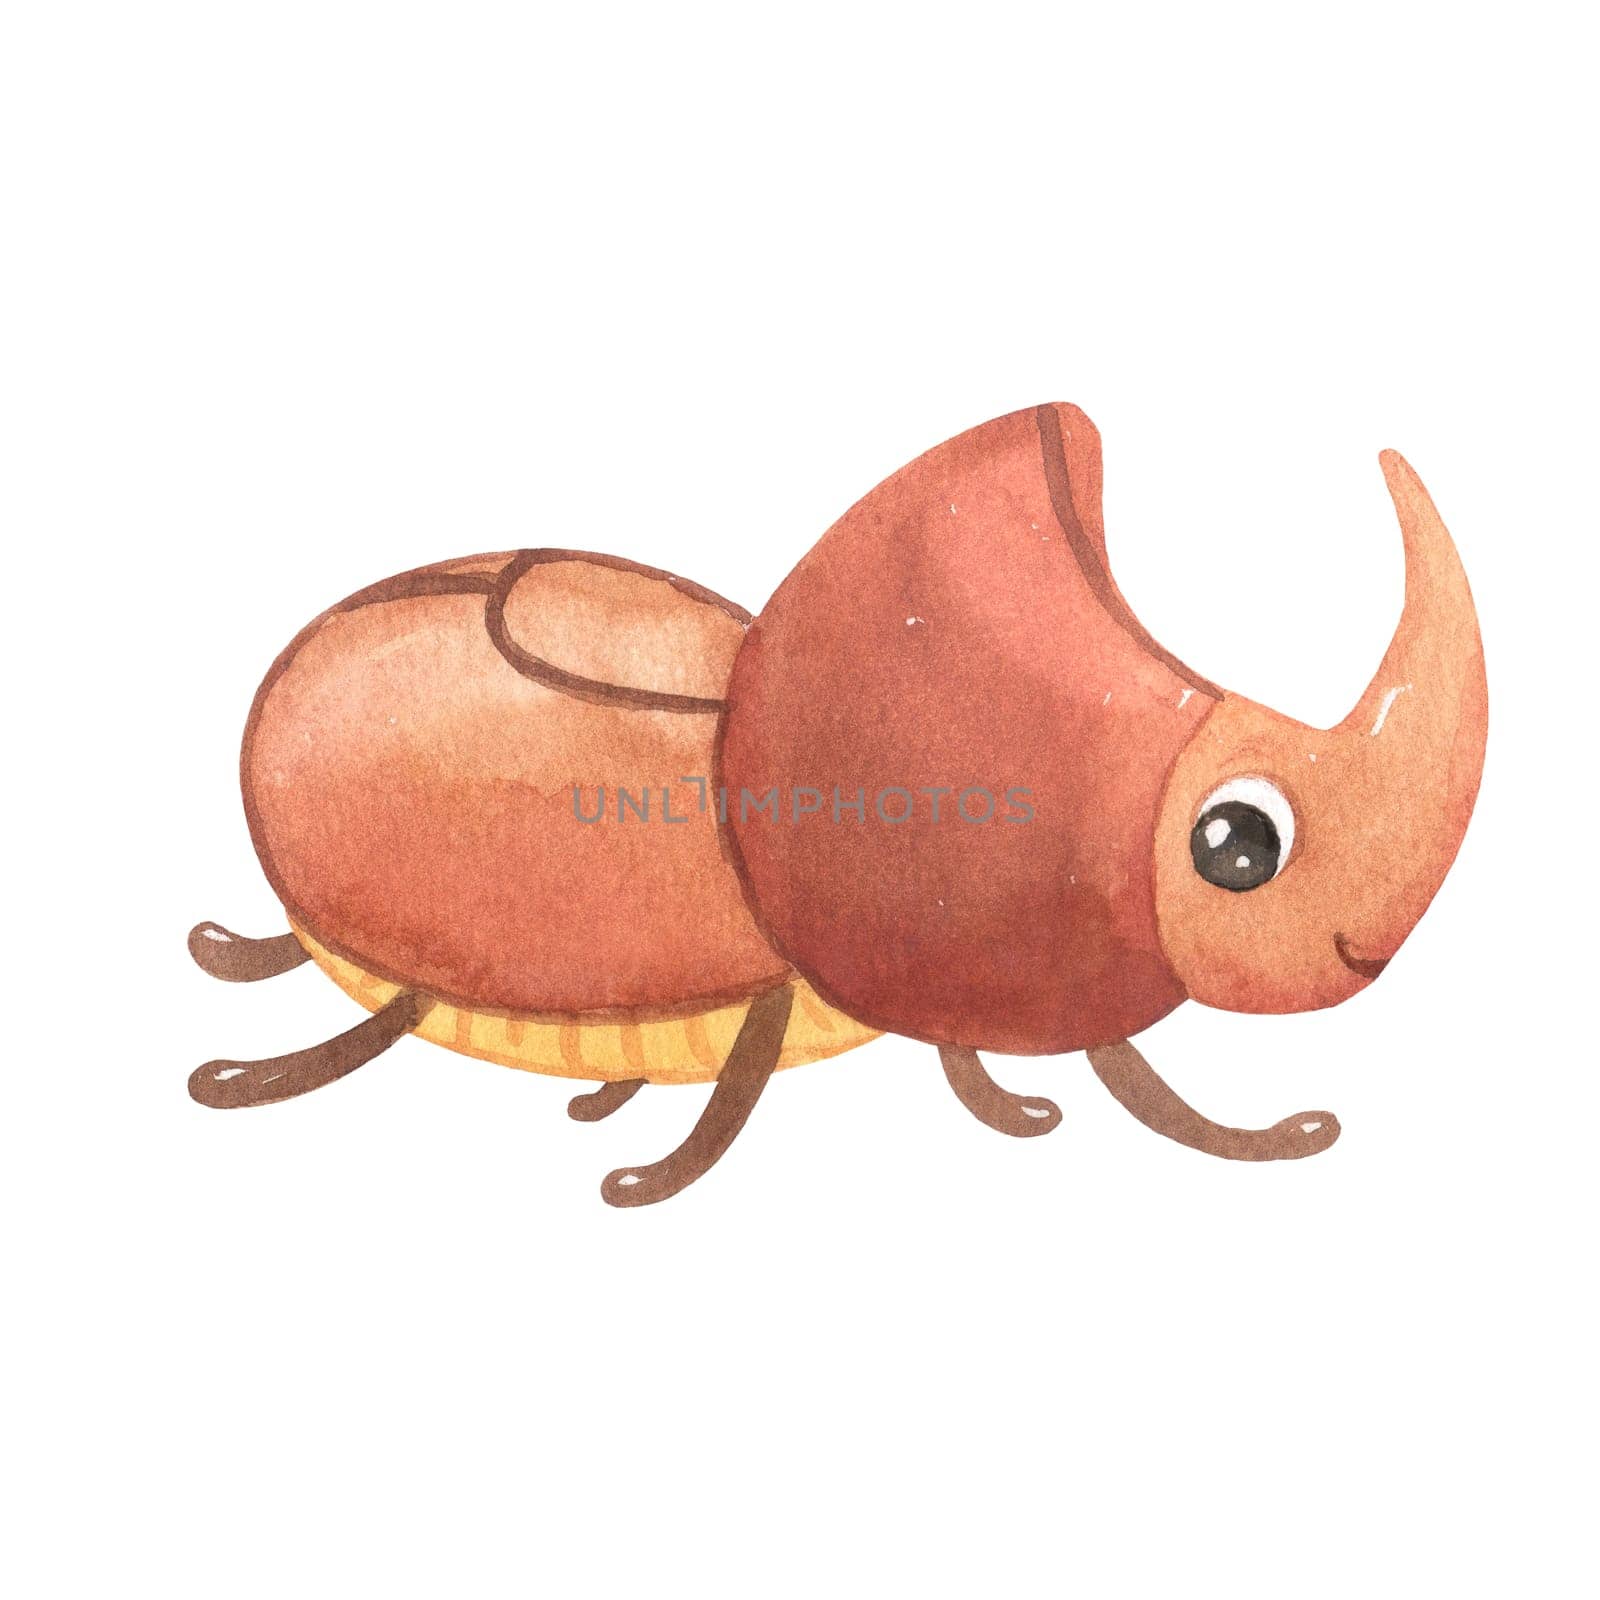 Cute smiling character rhinoceros beetle isolated on white background. Funny insect for children. Watercolor cartoon illustration